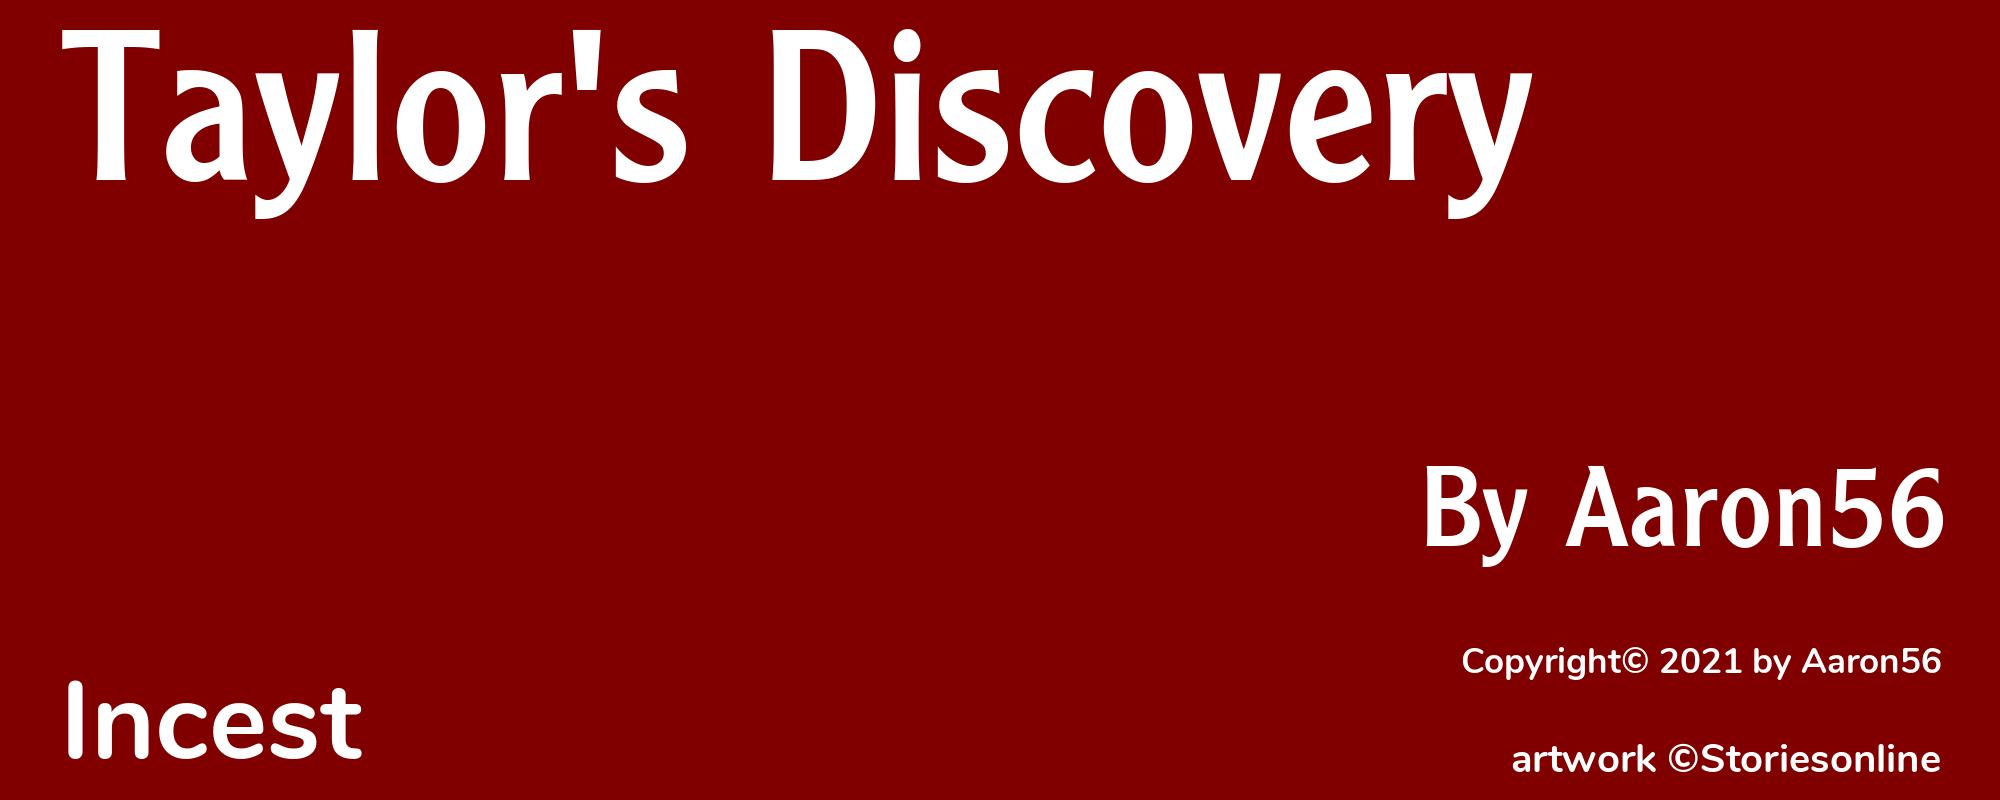 Taylor's Discovery - Cover